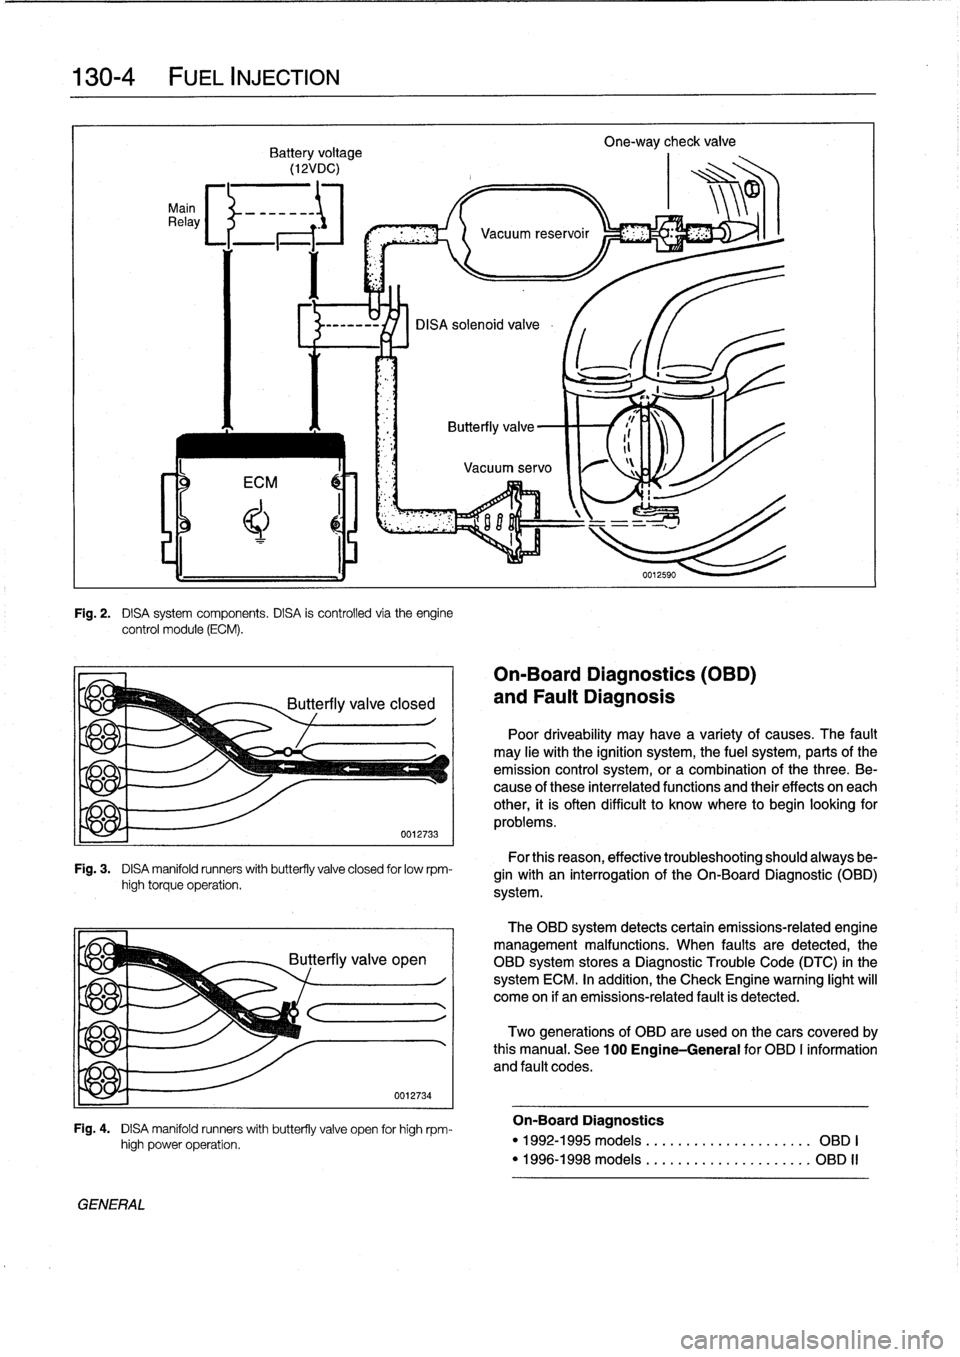 BMW 323i 1993 E36 Repair Manual 
130-
4

	

FUEL
INJECTION

Main
Relay

Fig
.
2
.

	

DISA
system
components
.
DISA
is
controlled
via
theengine
control
module
(ECM)
.

Fig
.
3
.

	

DISA
manifold
runners
with
butterfly
valve
closed
